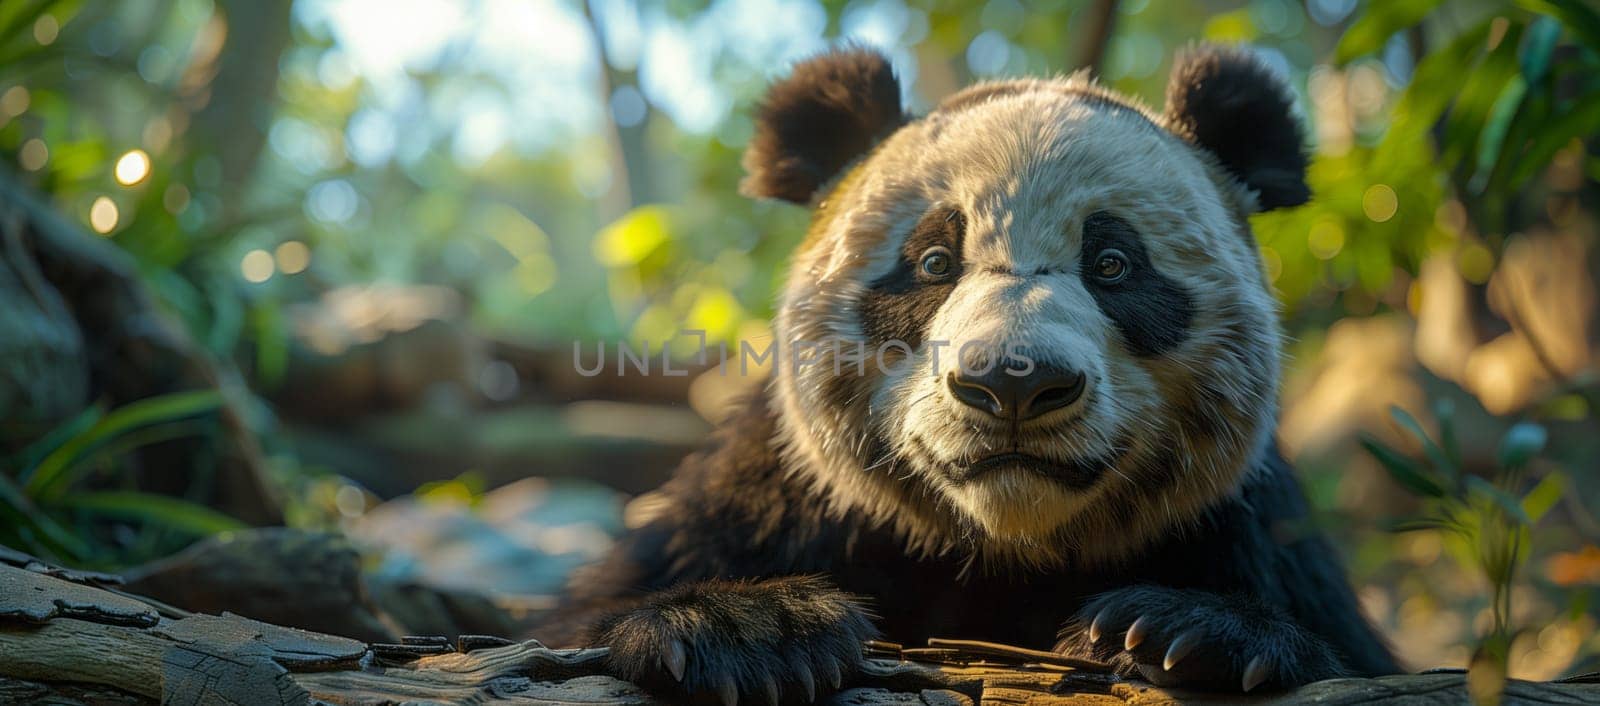 A carnivore panda bear is peacefully laying on a rock in the woods, gazing at the camera amidst a natural landscape of grass and trees